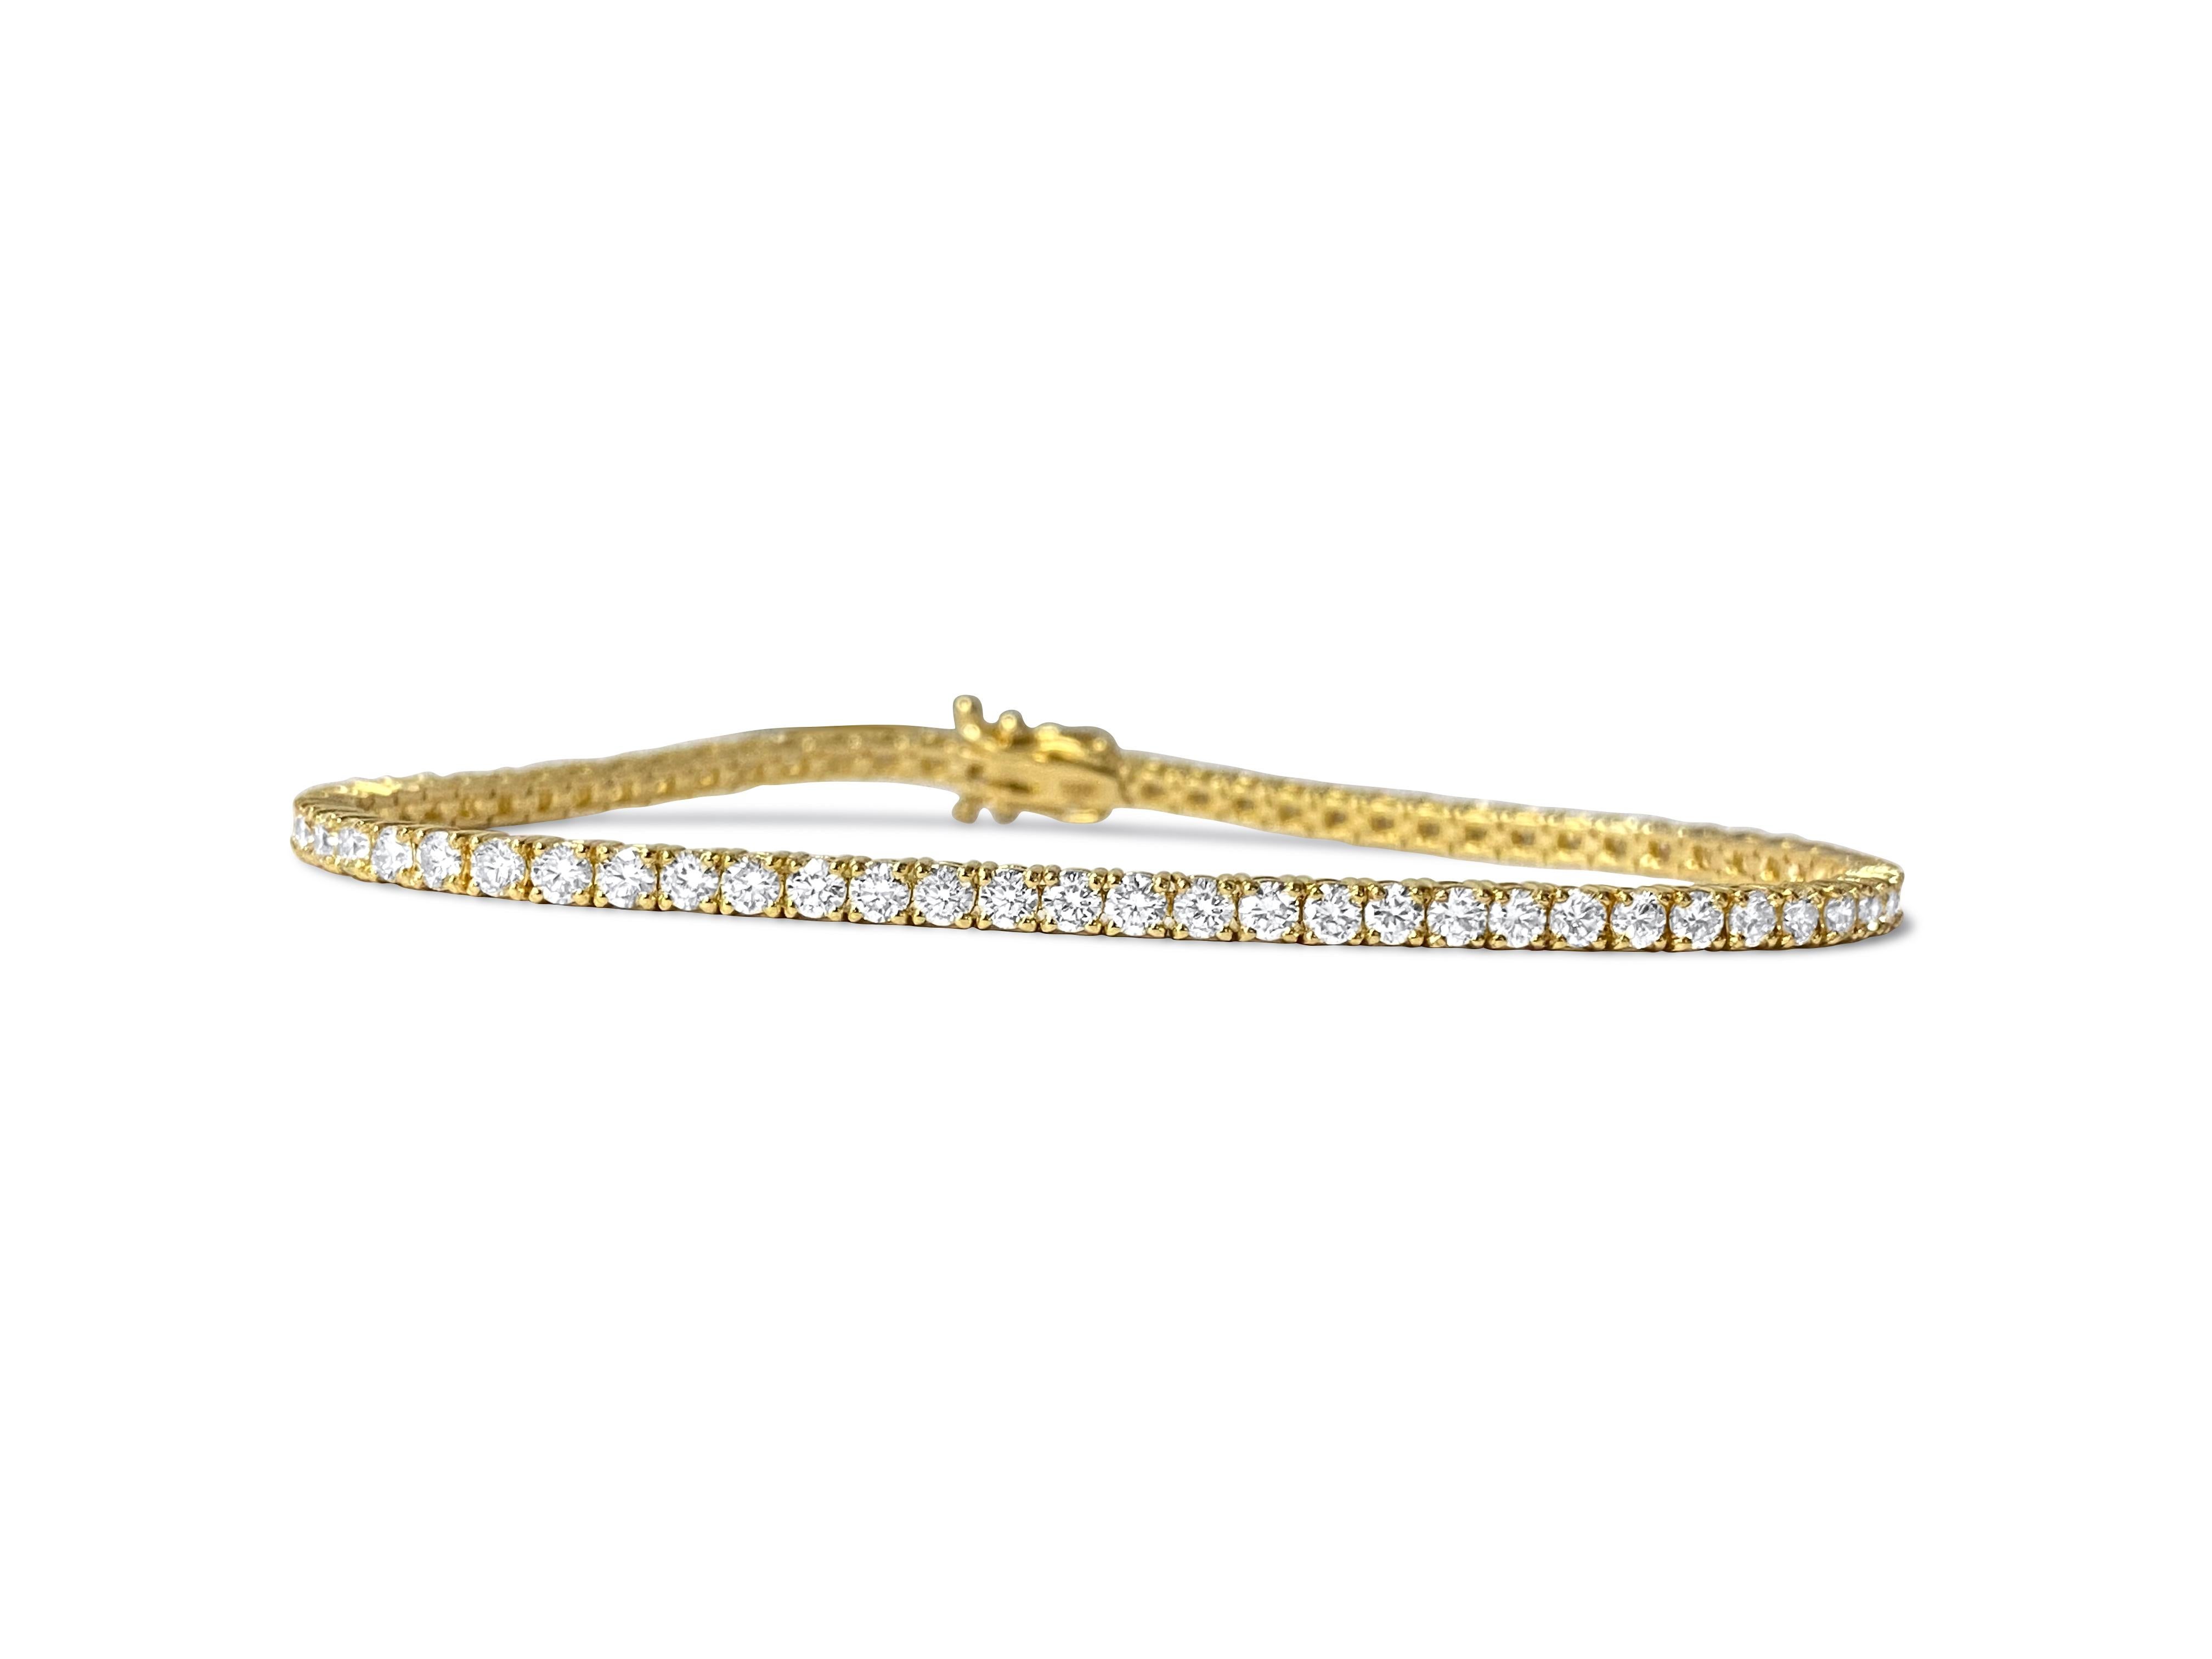 Crafted from luxurious 14k yellow gold, this exquisite unisex diamond tennis bracelet boasts a total carat weight of 5.00, featuring diamonds with VVS-VS clarity and H color. Set in prongs, each round brilliant cut diamond sparkles with unparalleled